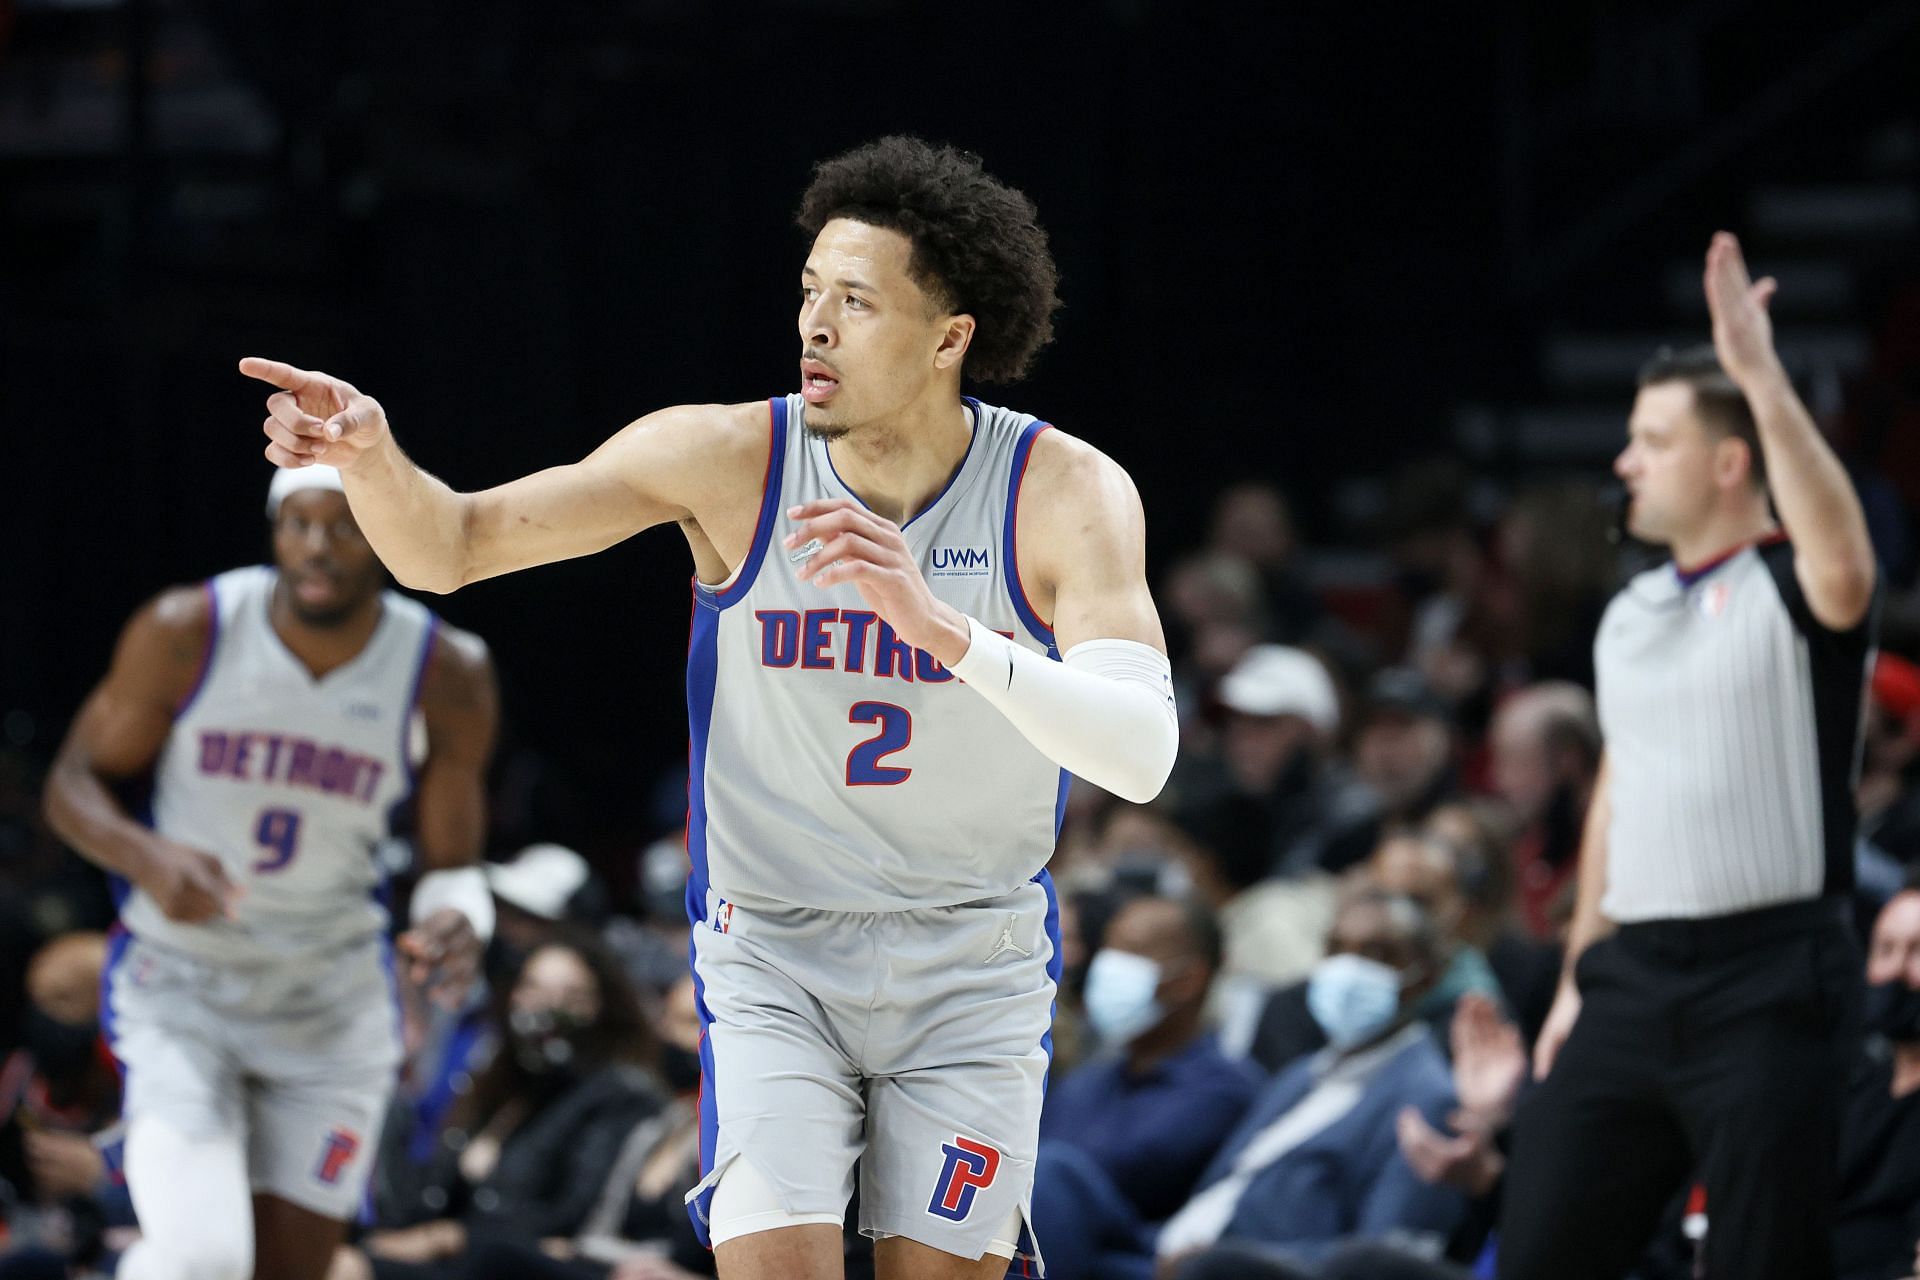 Cade Cunningham of the Pistons